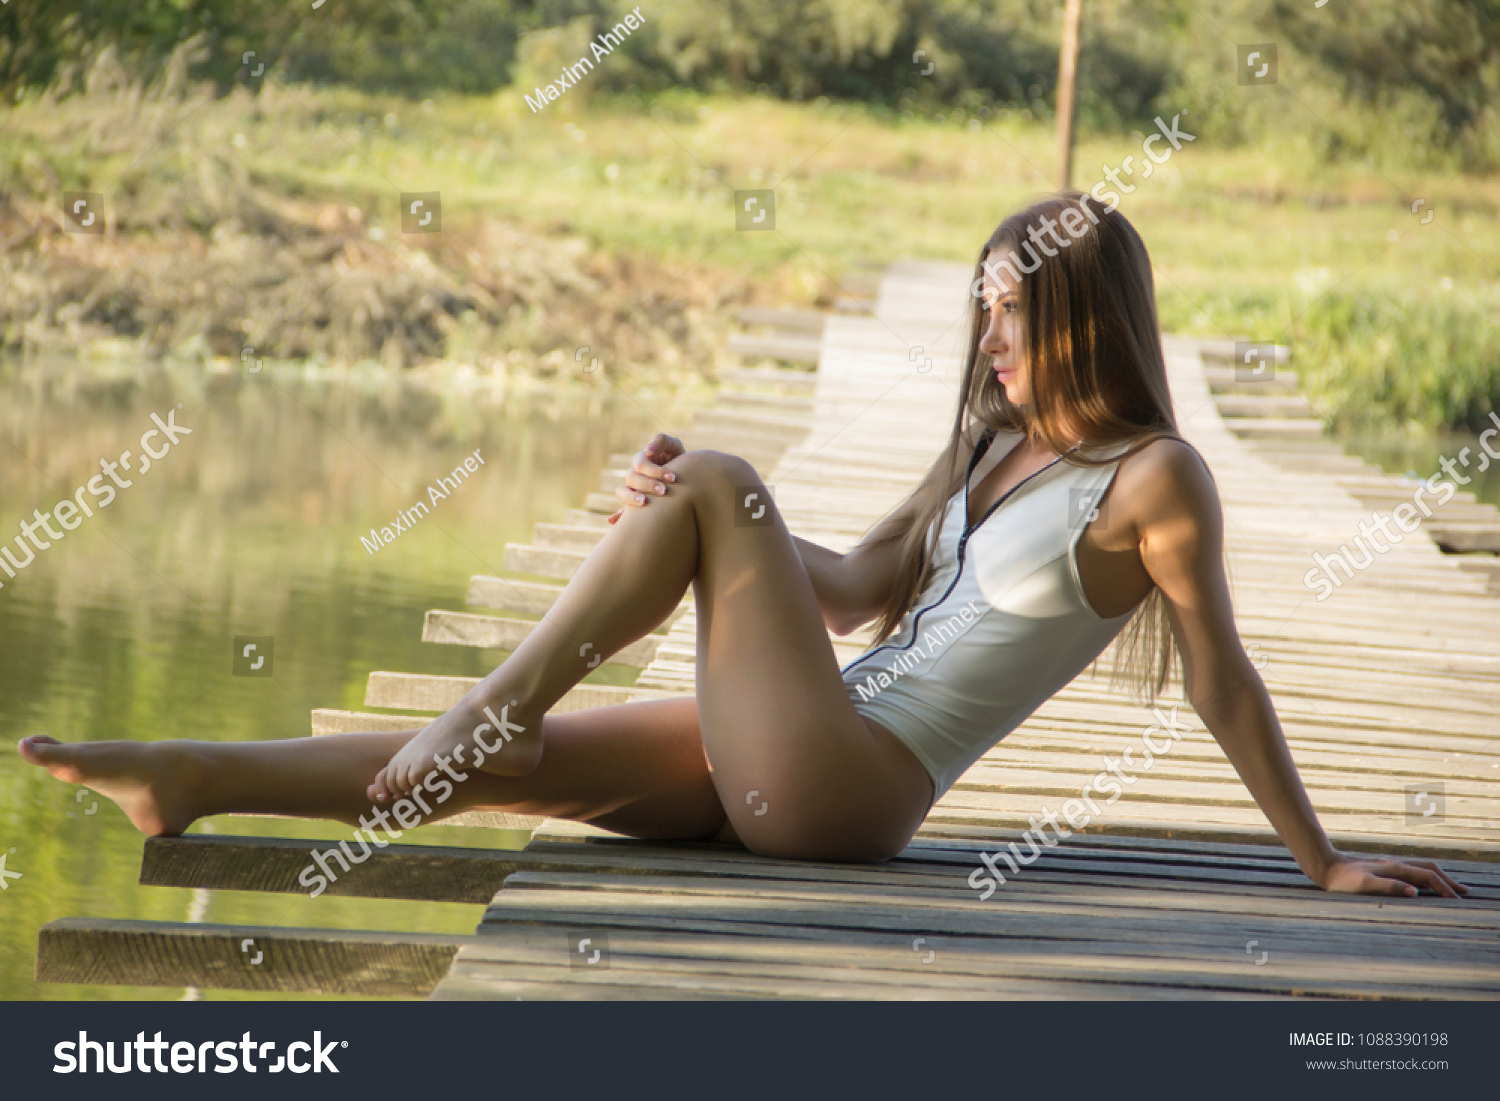 Skinny Sexy Chick Gives Attractive Pose Outdoor